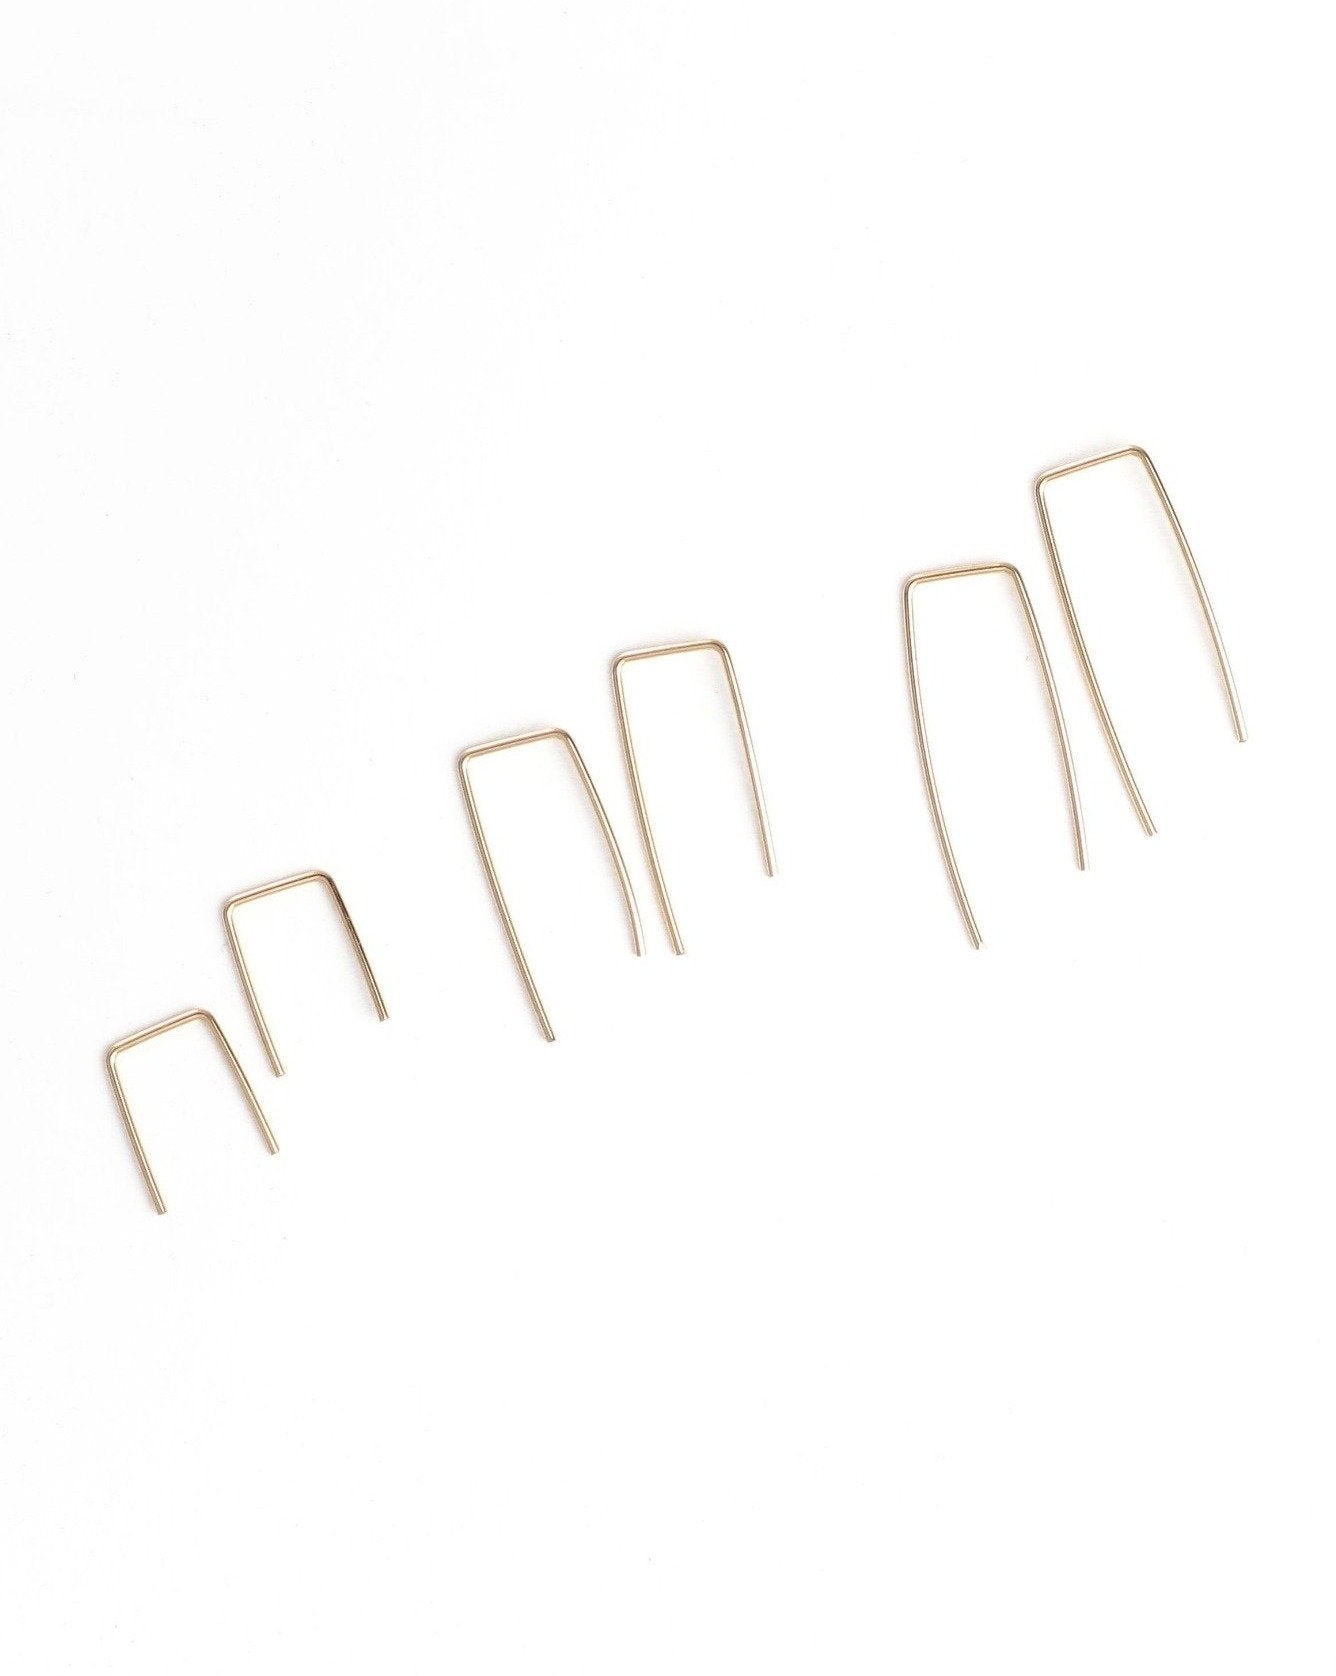 You Earrings by KOZAKH. Hand shaped minimalist bar earrings, crafted in 14K Gold Filled.